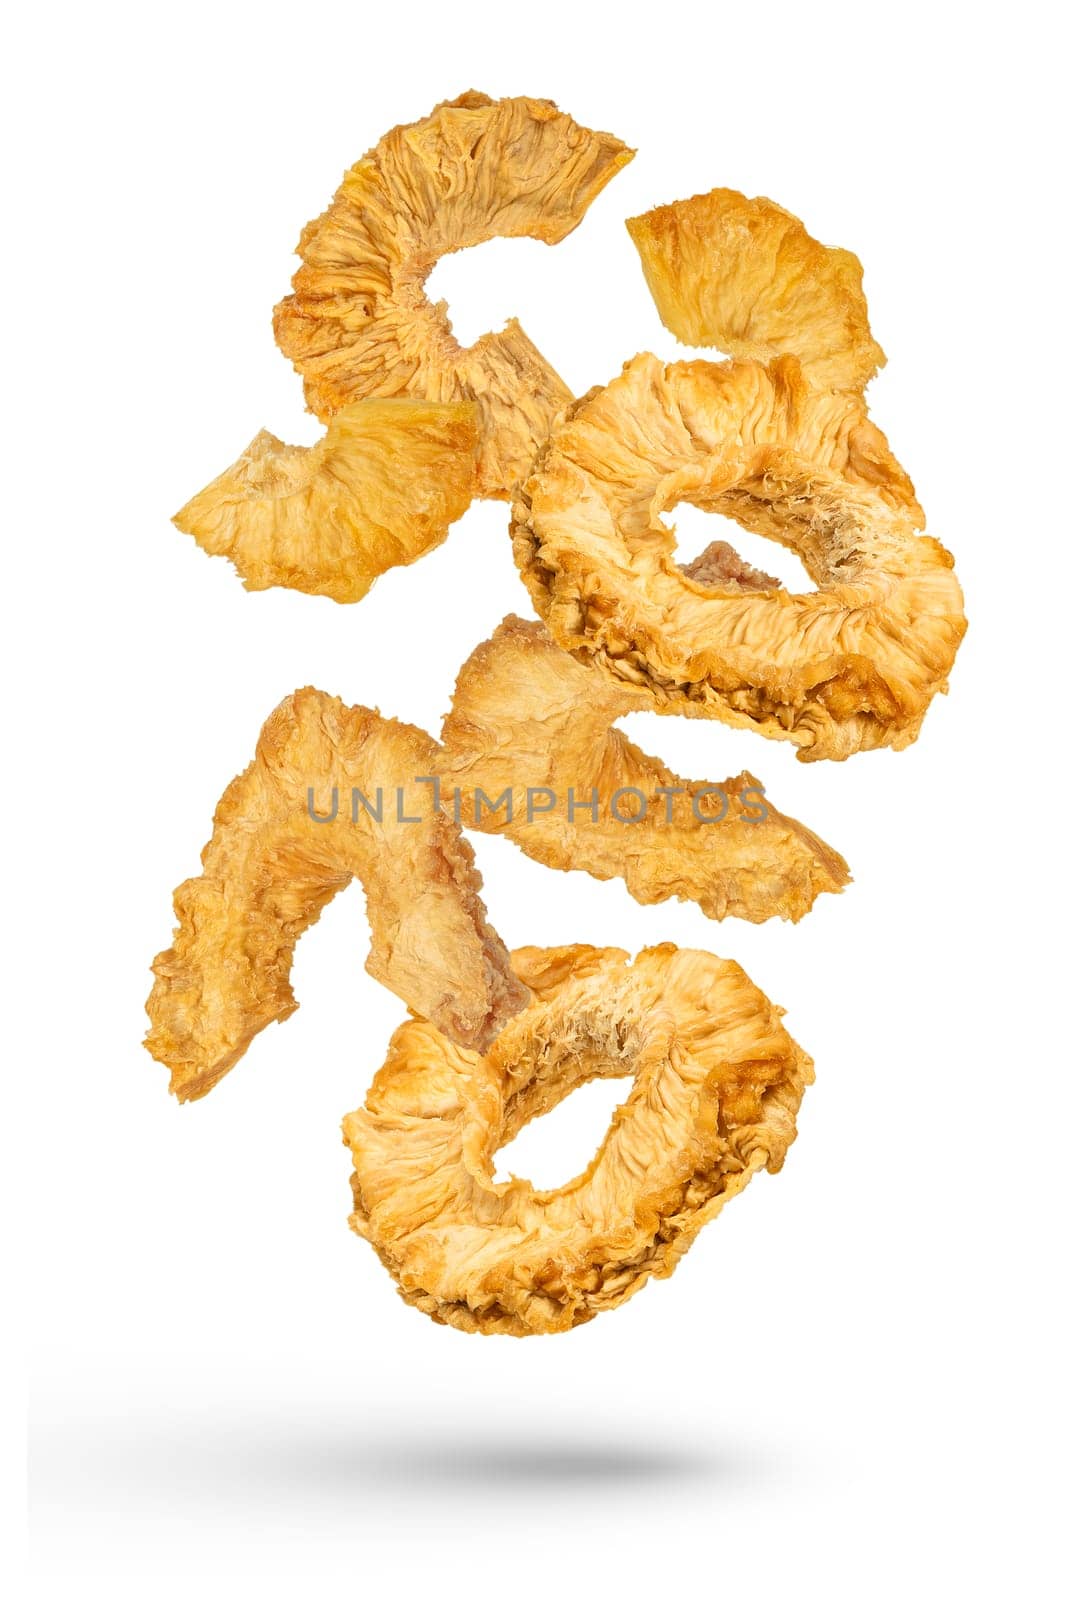 Falling slices of dried pineapple on a white isolated background. Dried pineapple rings of different cuts scatter in different directions. High quality photo